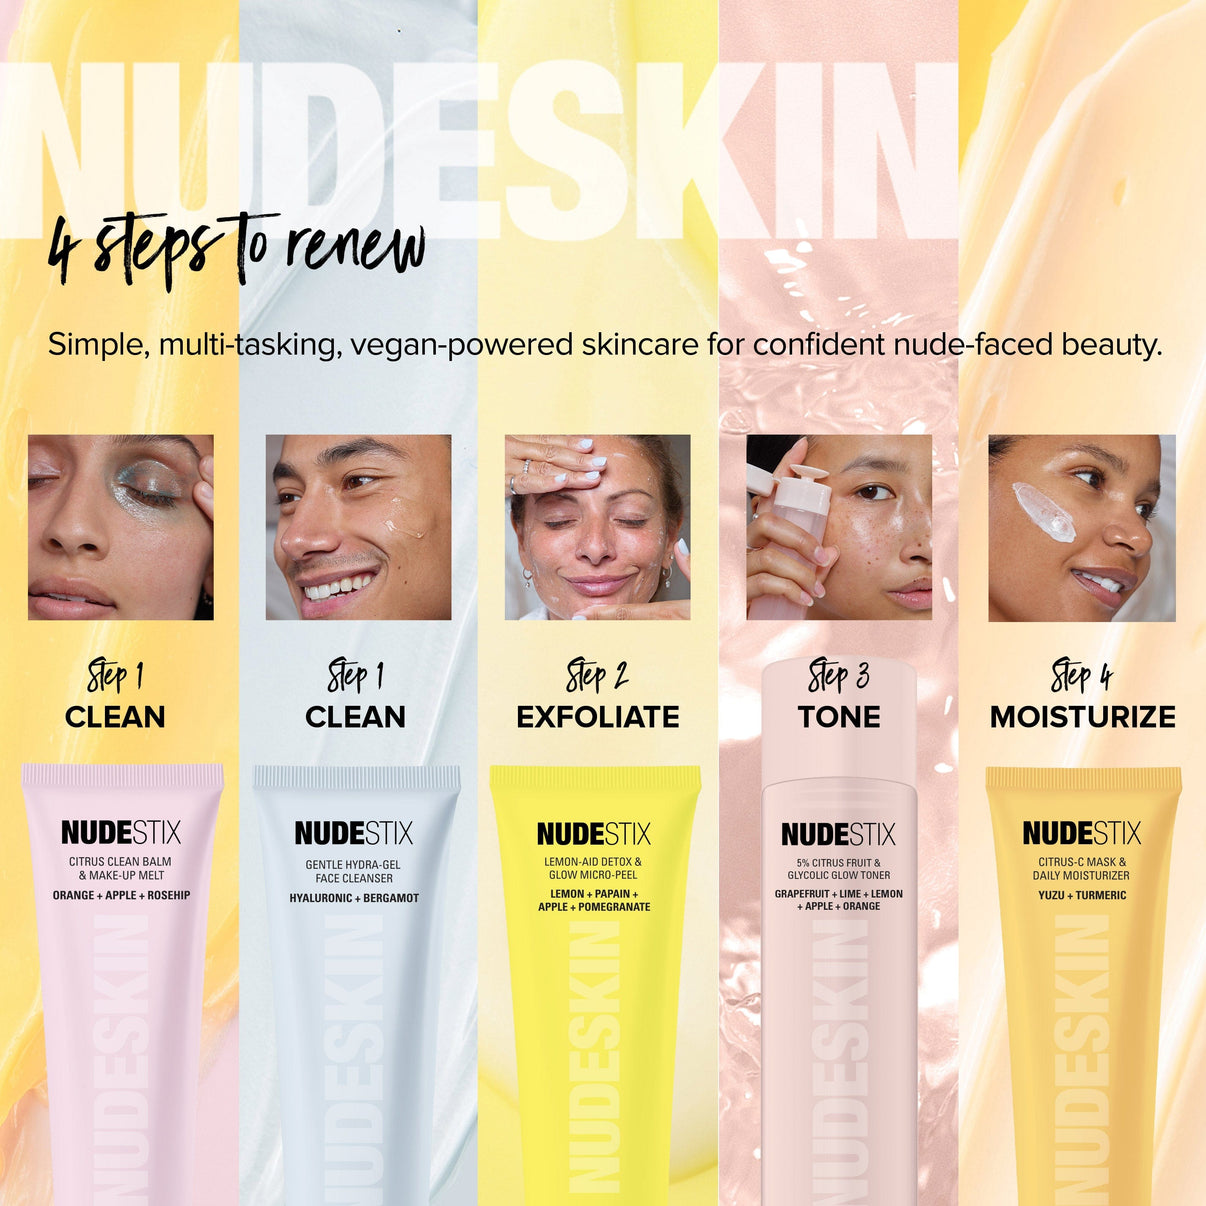 Nudeskin step 4: LEMON-AID DETOX & GLOW MICRO-PEEL and other products